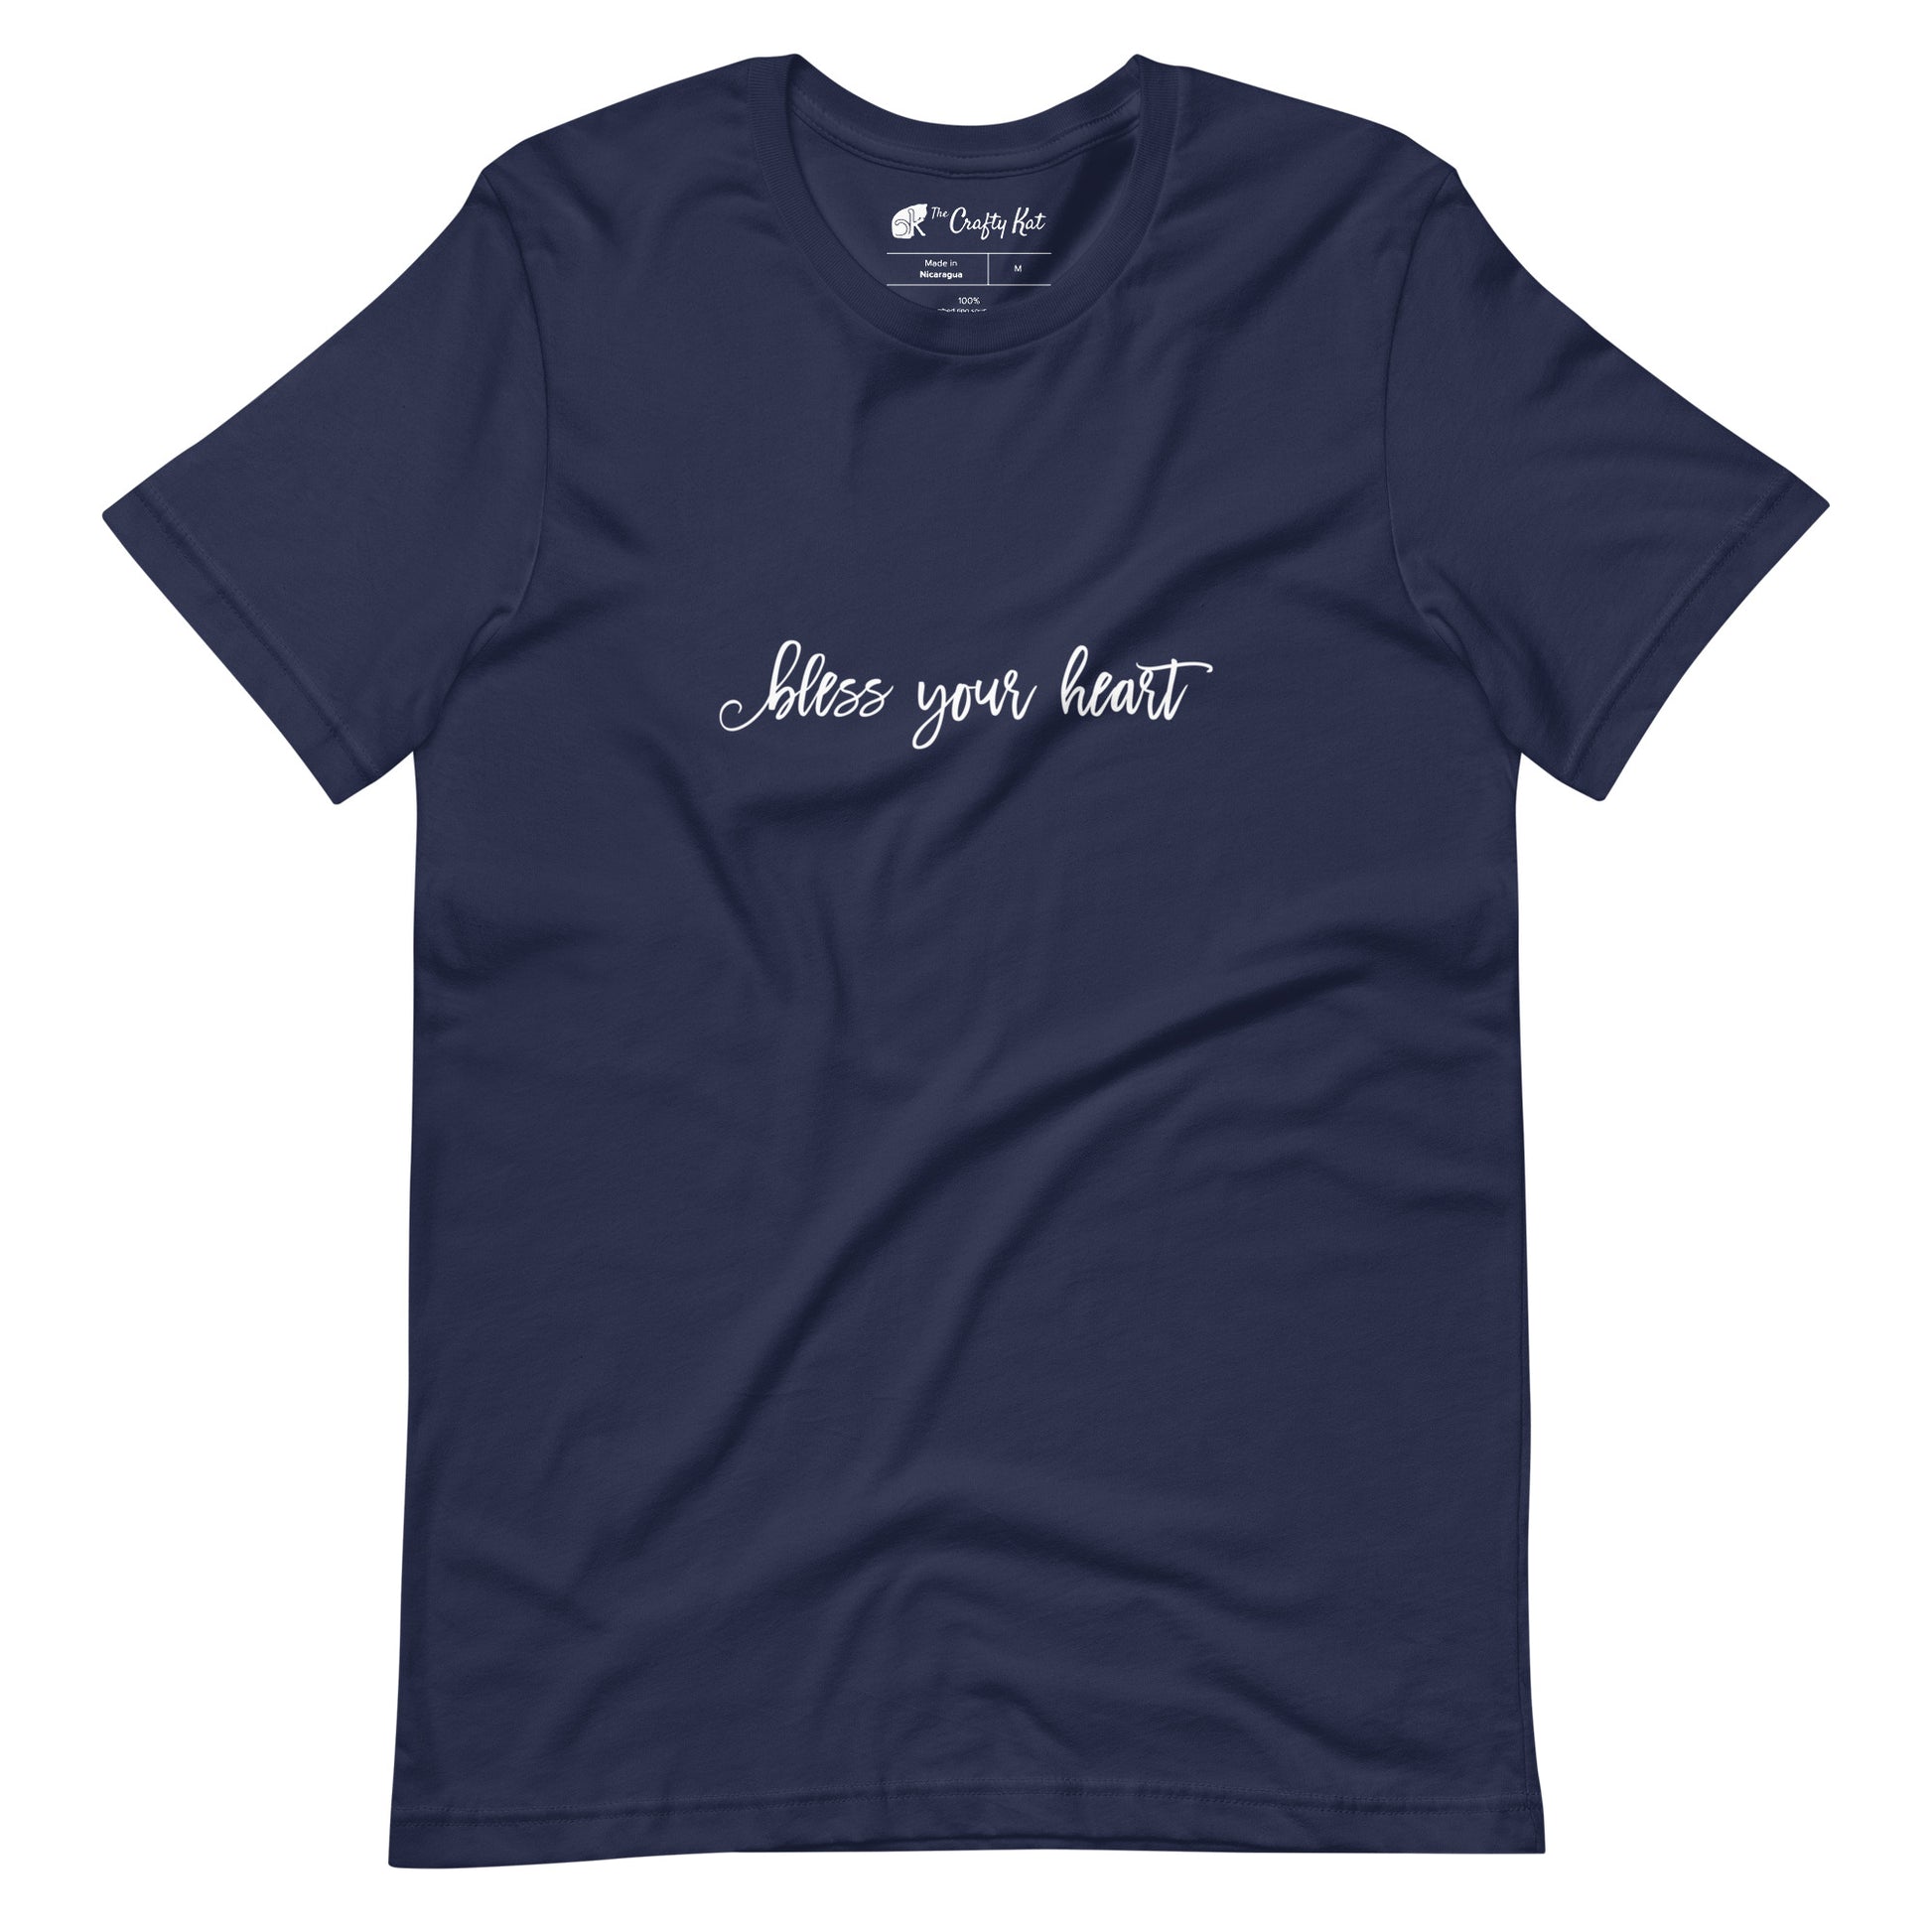 Navy t-shirt with white graphic in an excessively twee font: "bless your heart"